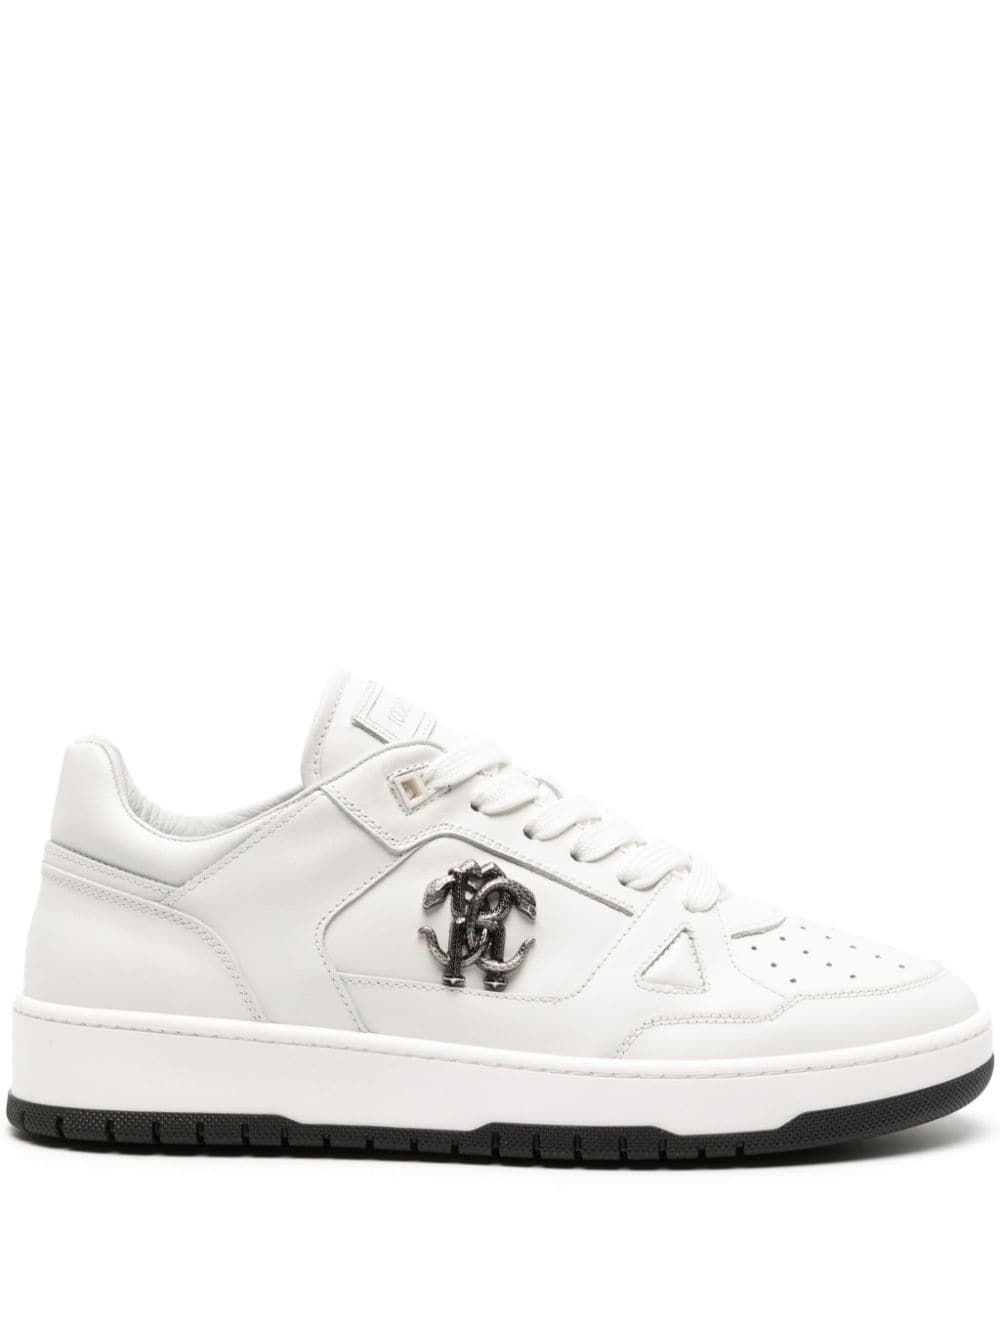 Roberto Cavalli Mirror Snake-embellished Leather Trainers In White